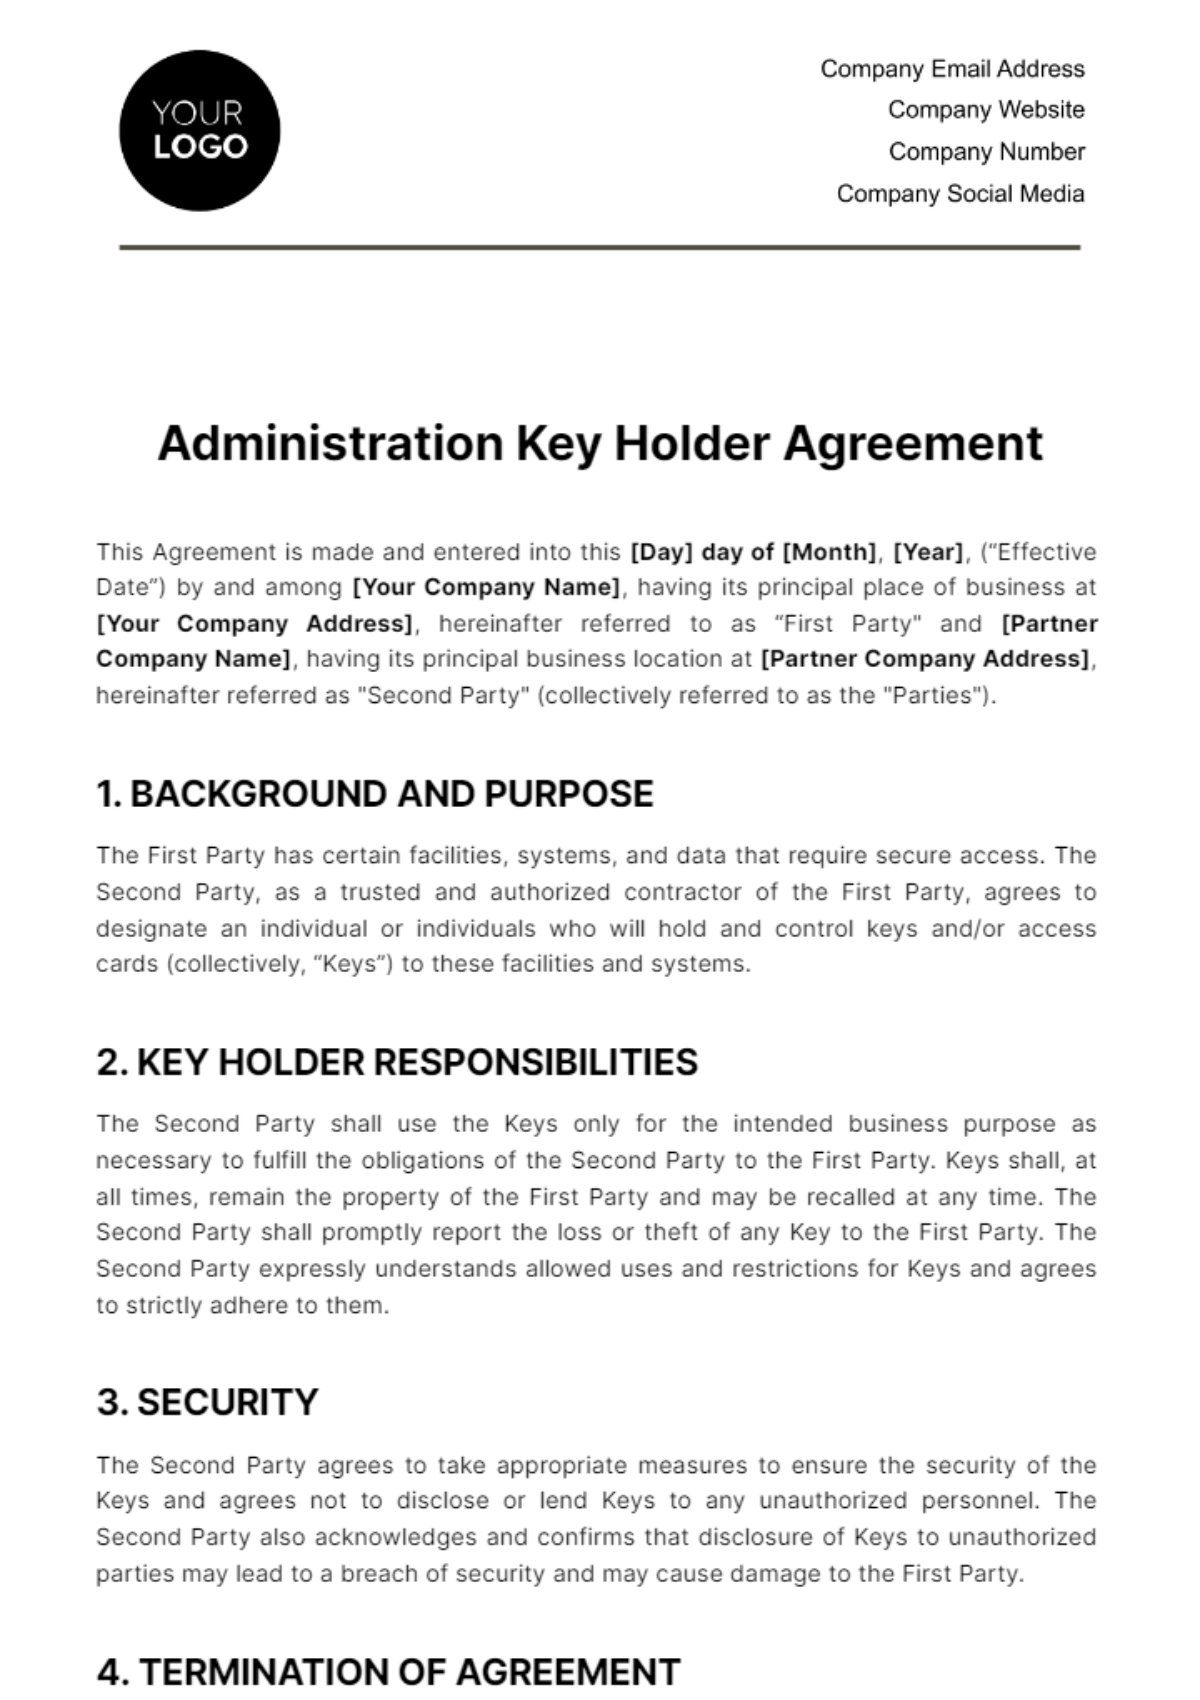 Free Administration Key Holder Agreement Template